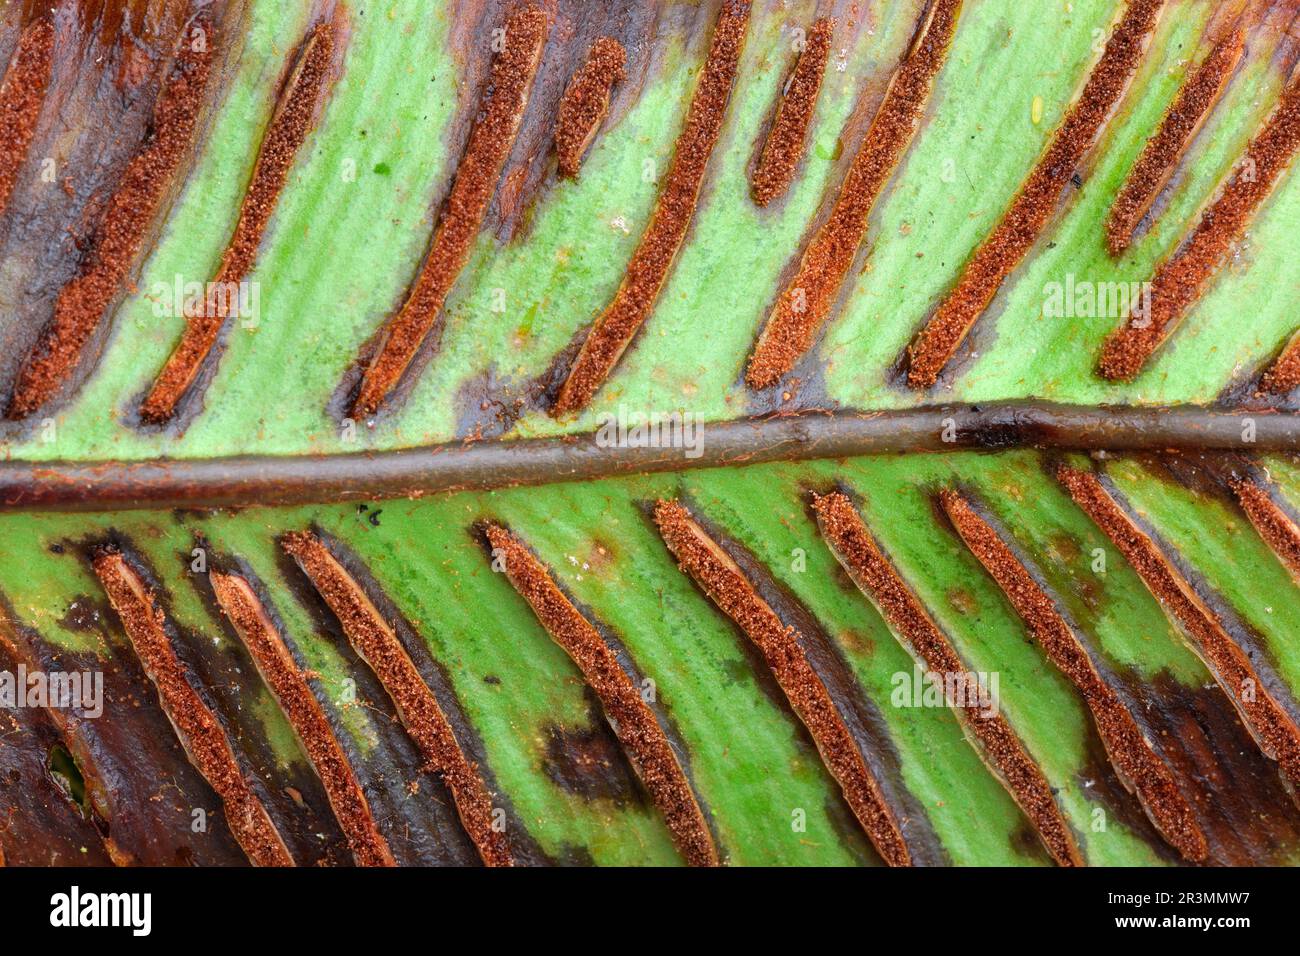 Hart's Tongue Fern (Phyllitis scolopendrium) close-up of underside of leaf blade showing sporangia, reproductive spore-producing structures Stock Photo